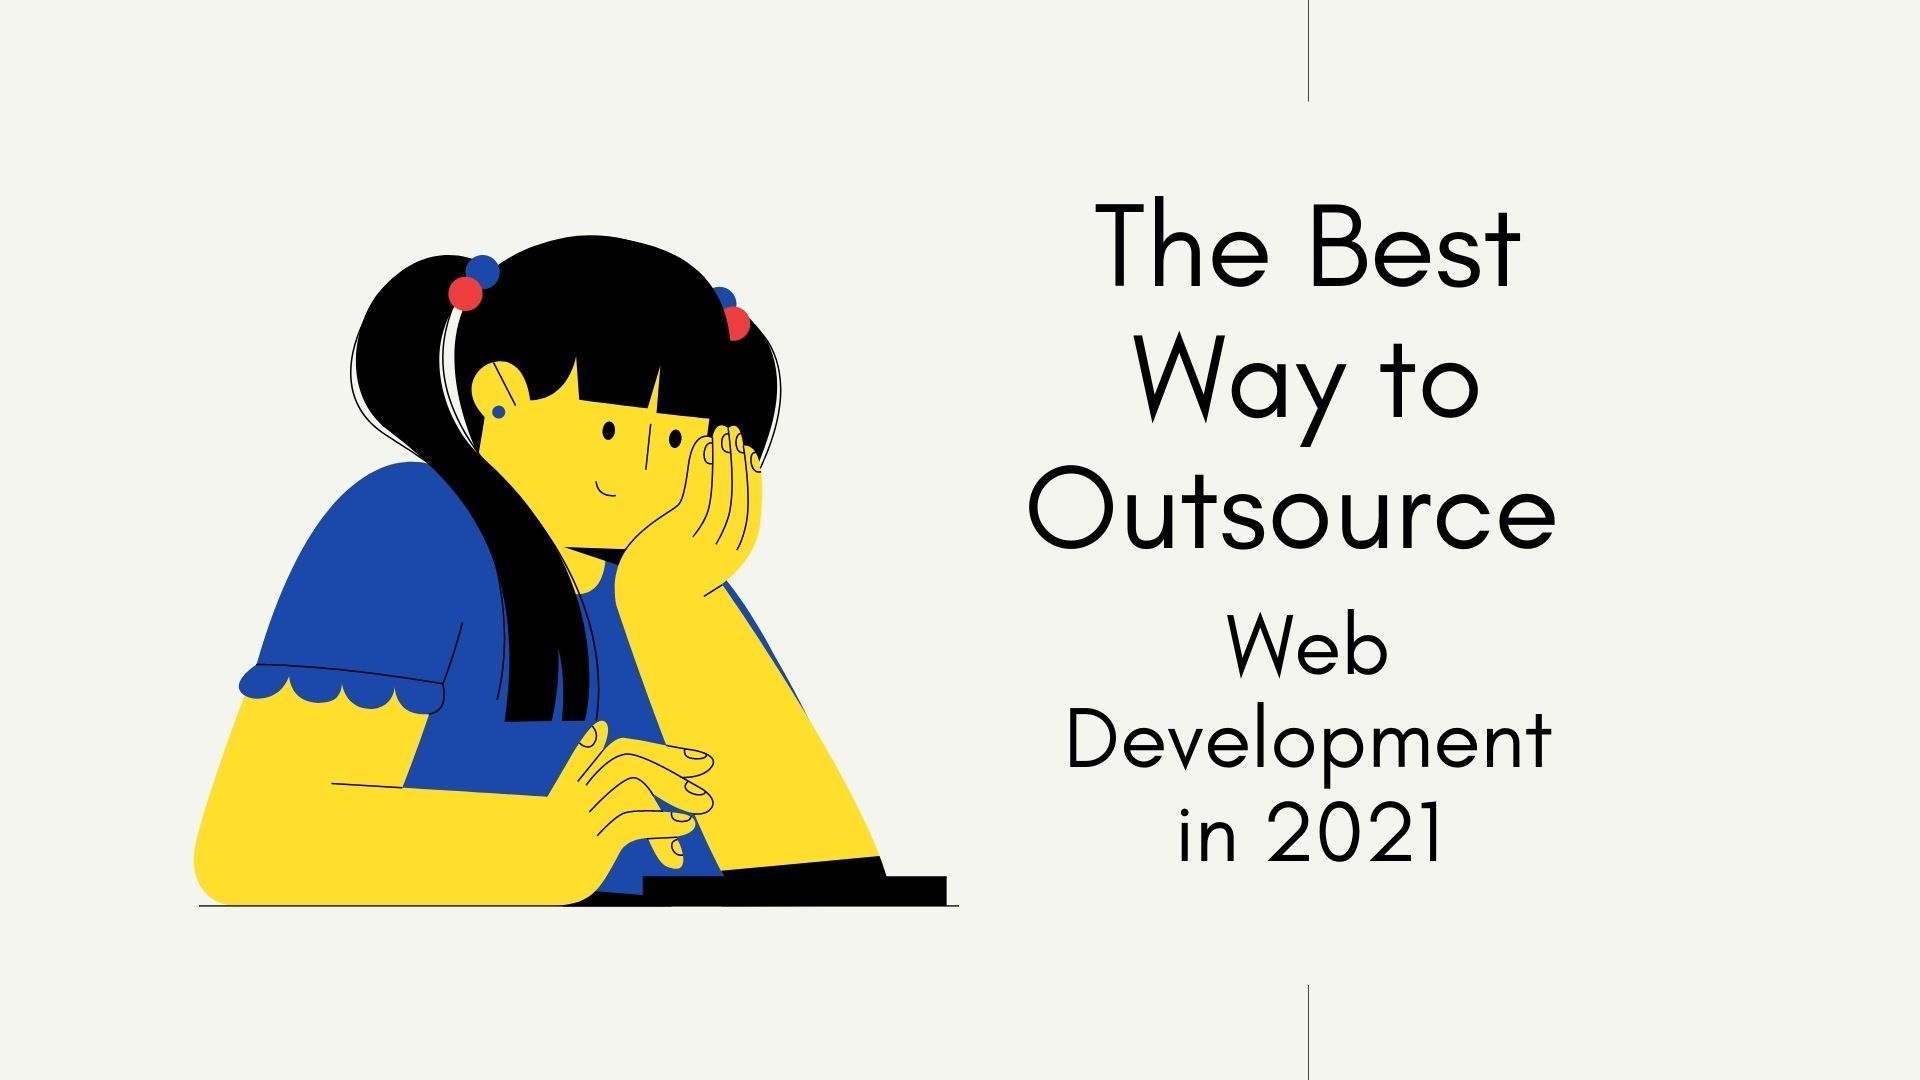 The Best Way to Outsource Web Development in 2021